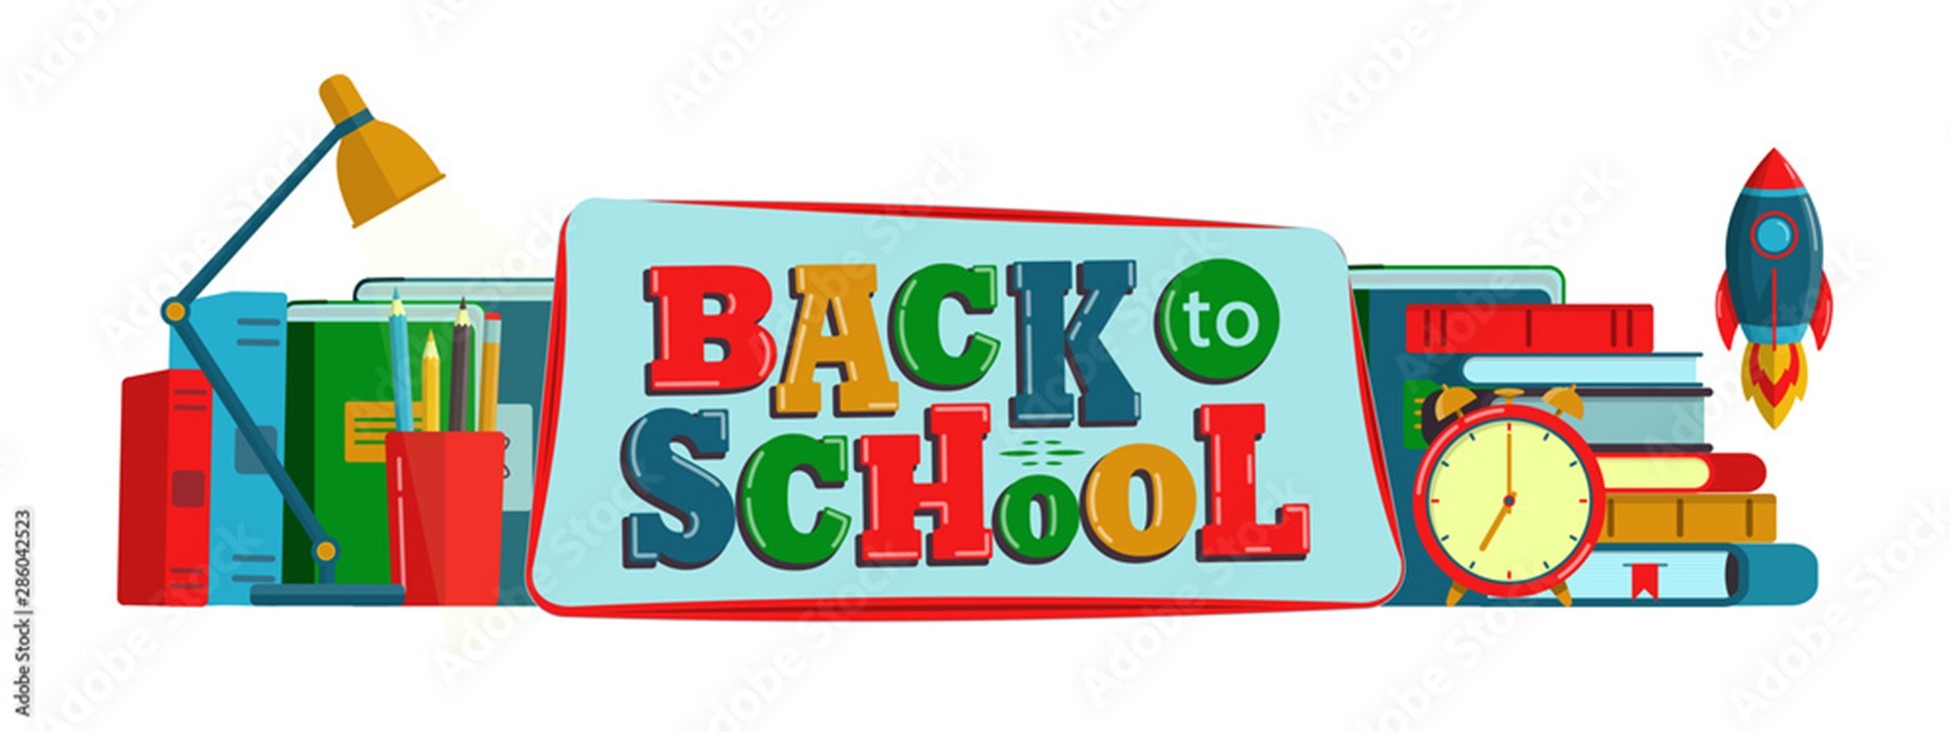 For more information on Back-to-School pricing and resources, click the link below. https://drive.google.com/file/d/1p38Noy-EQiXd44Hp4sRMuV6AcqPl_lO5/view?usp=sharing